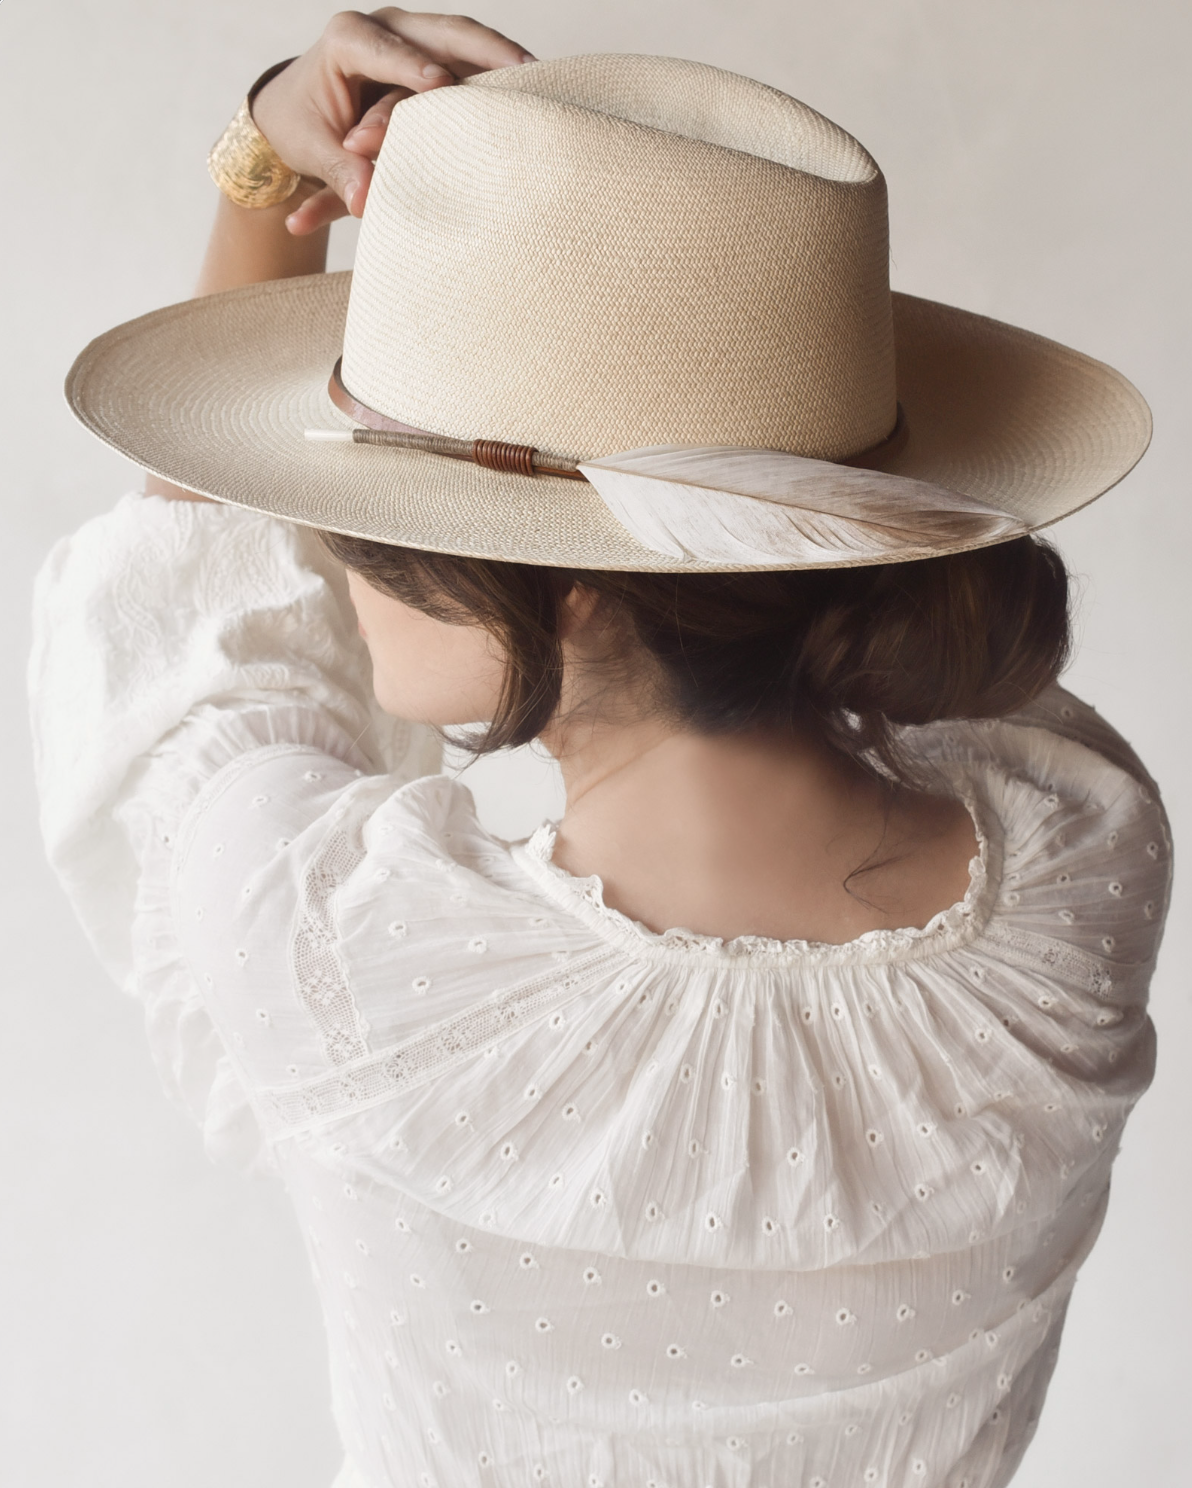 A woman in a white blouse with a ruffled neckline is seen from behind, holding a stylish Ninakuru oquilla straw hat over her head. Her brown hair is neatly tucked under the Matteo Extra Long Brim S/M hat.